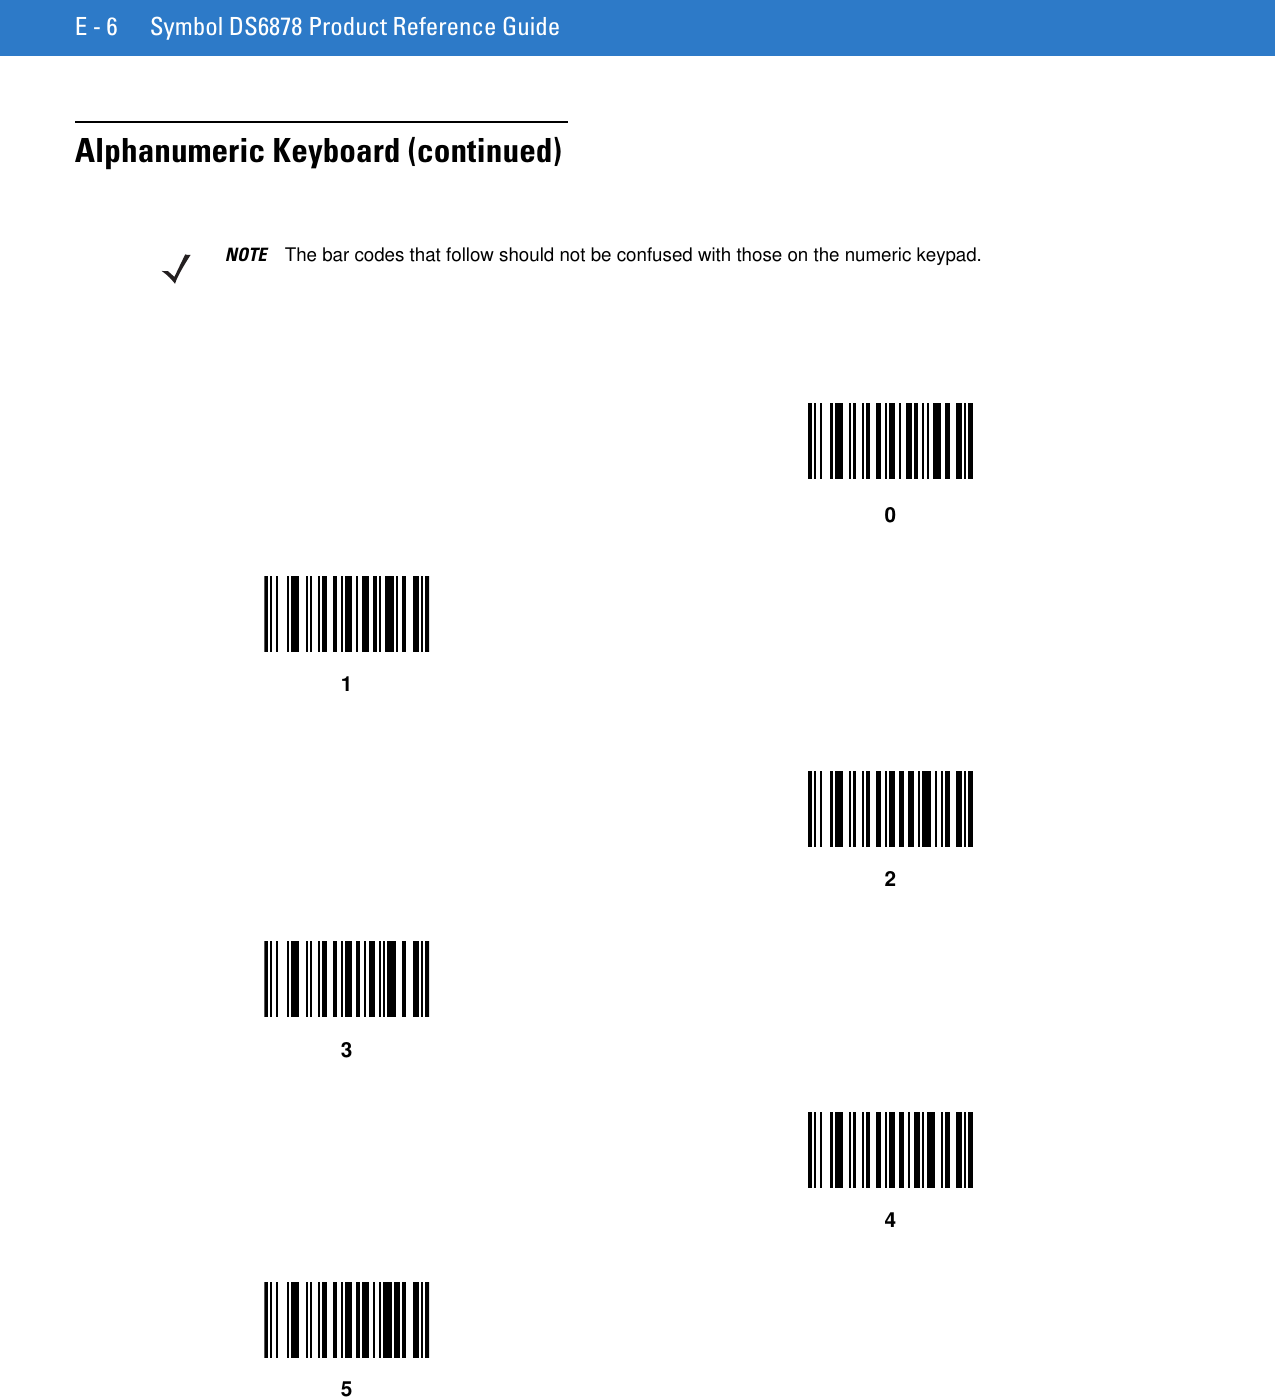 E - 6 Symbol DS6878 Product Reference GuideAlphanumeric Keyboard (continued)NOTE The bar codes that follow should not be confused with those on the numeric keypad.012345